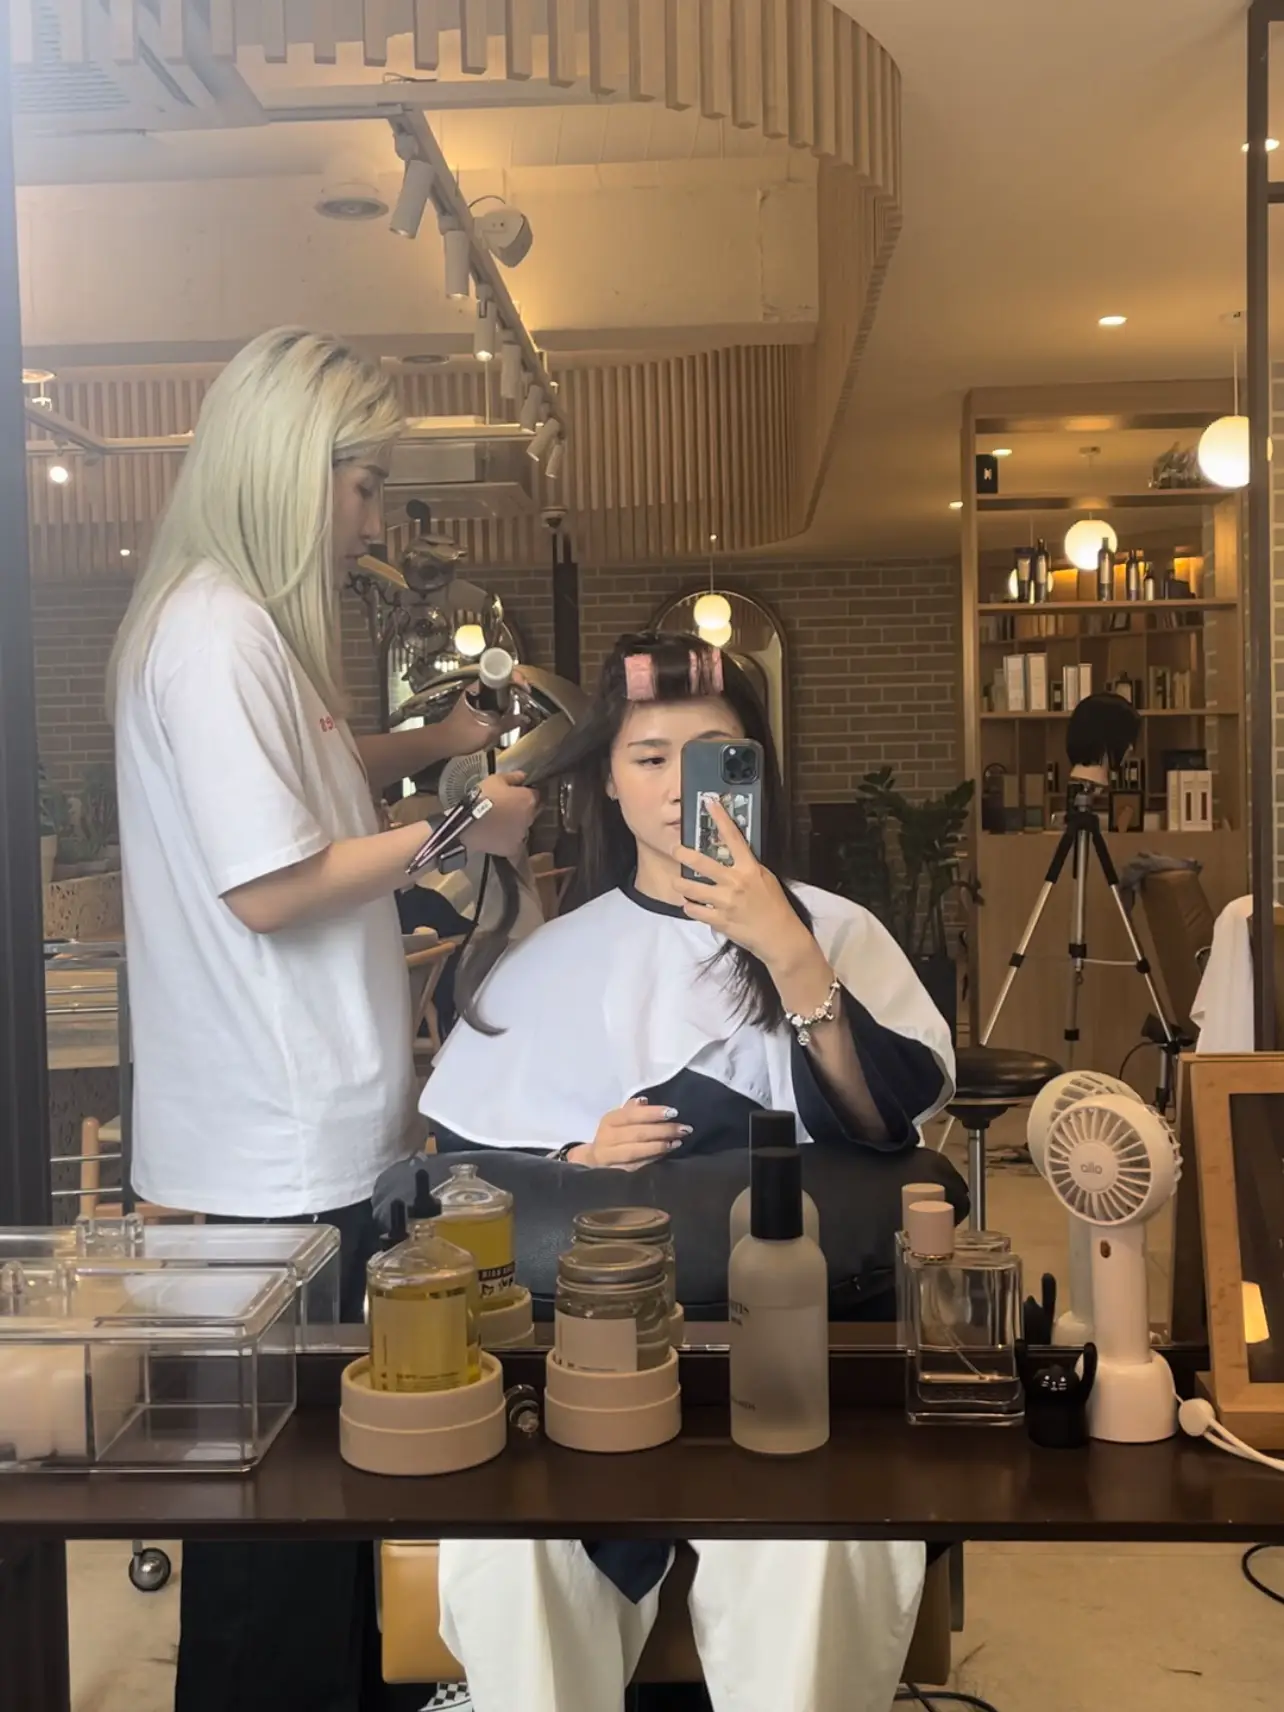 getting my hair done for the first time in korea💇🏻‍♀️🇰🇷's images(5)